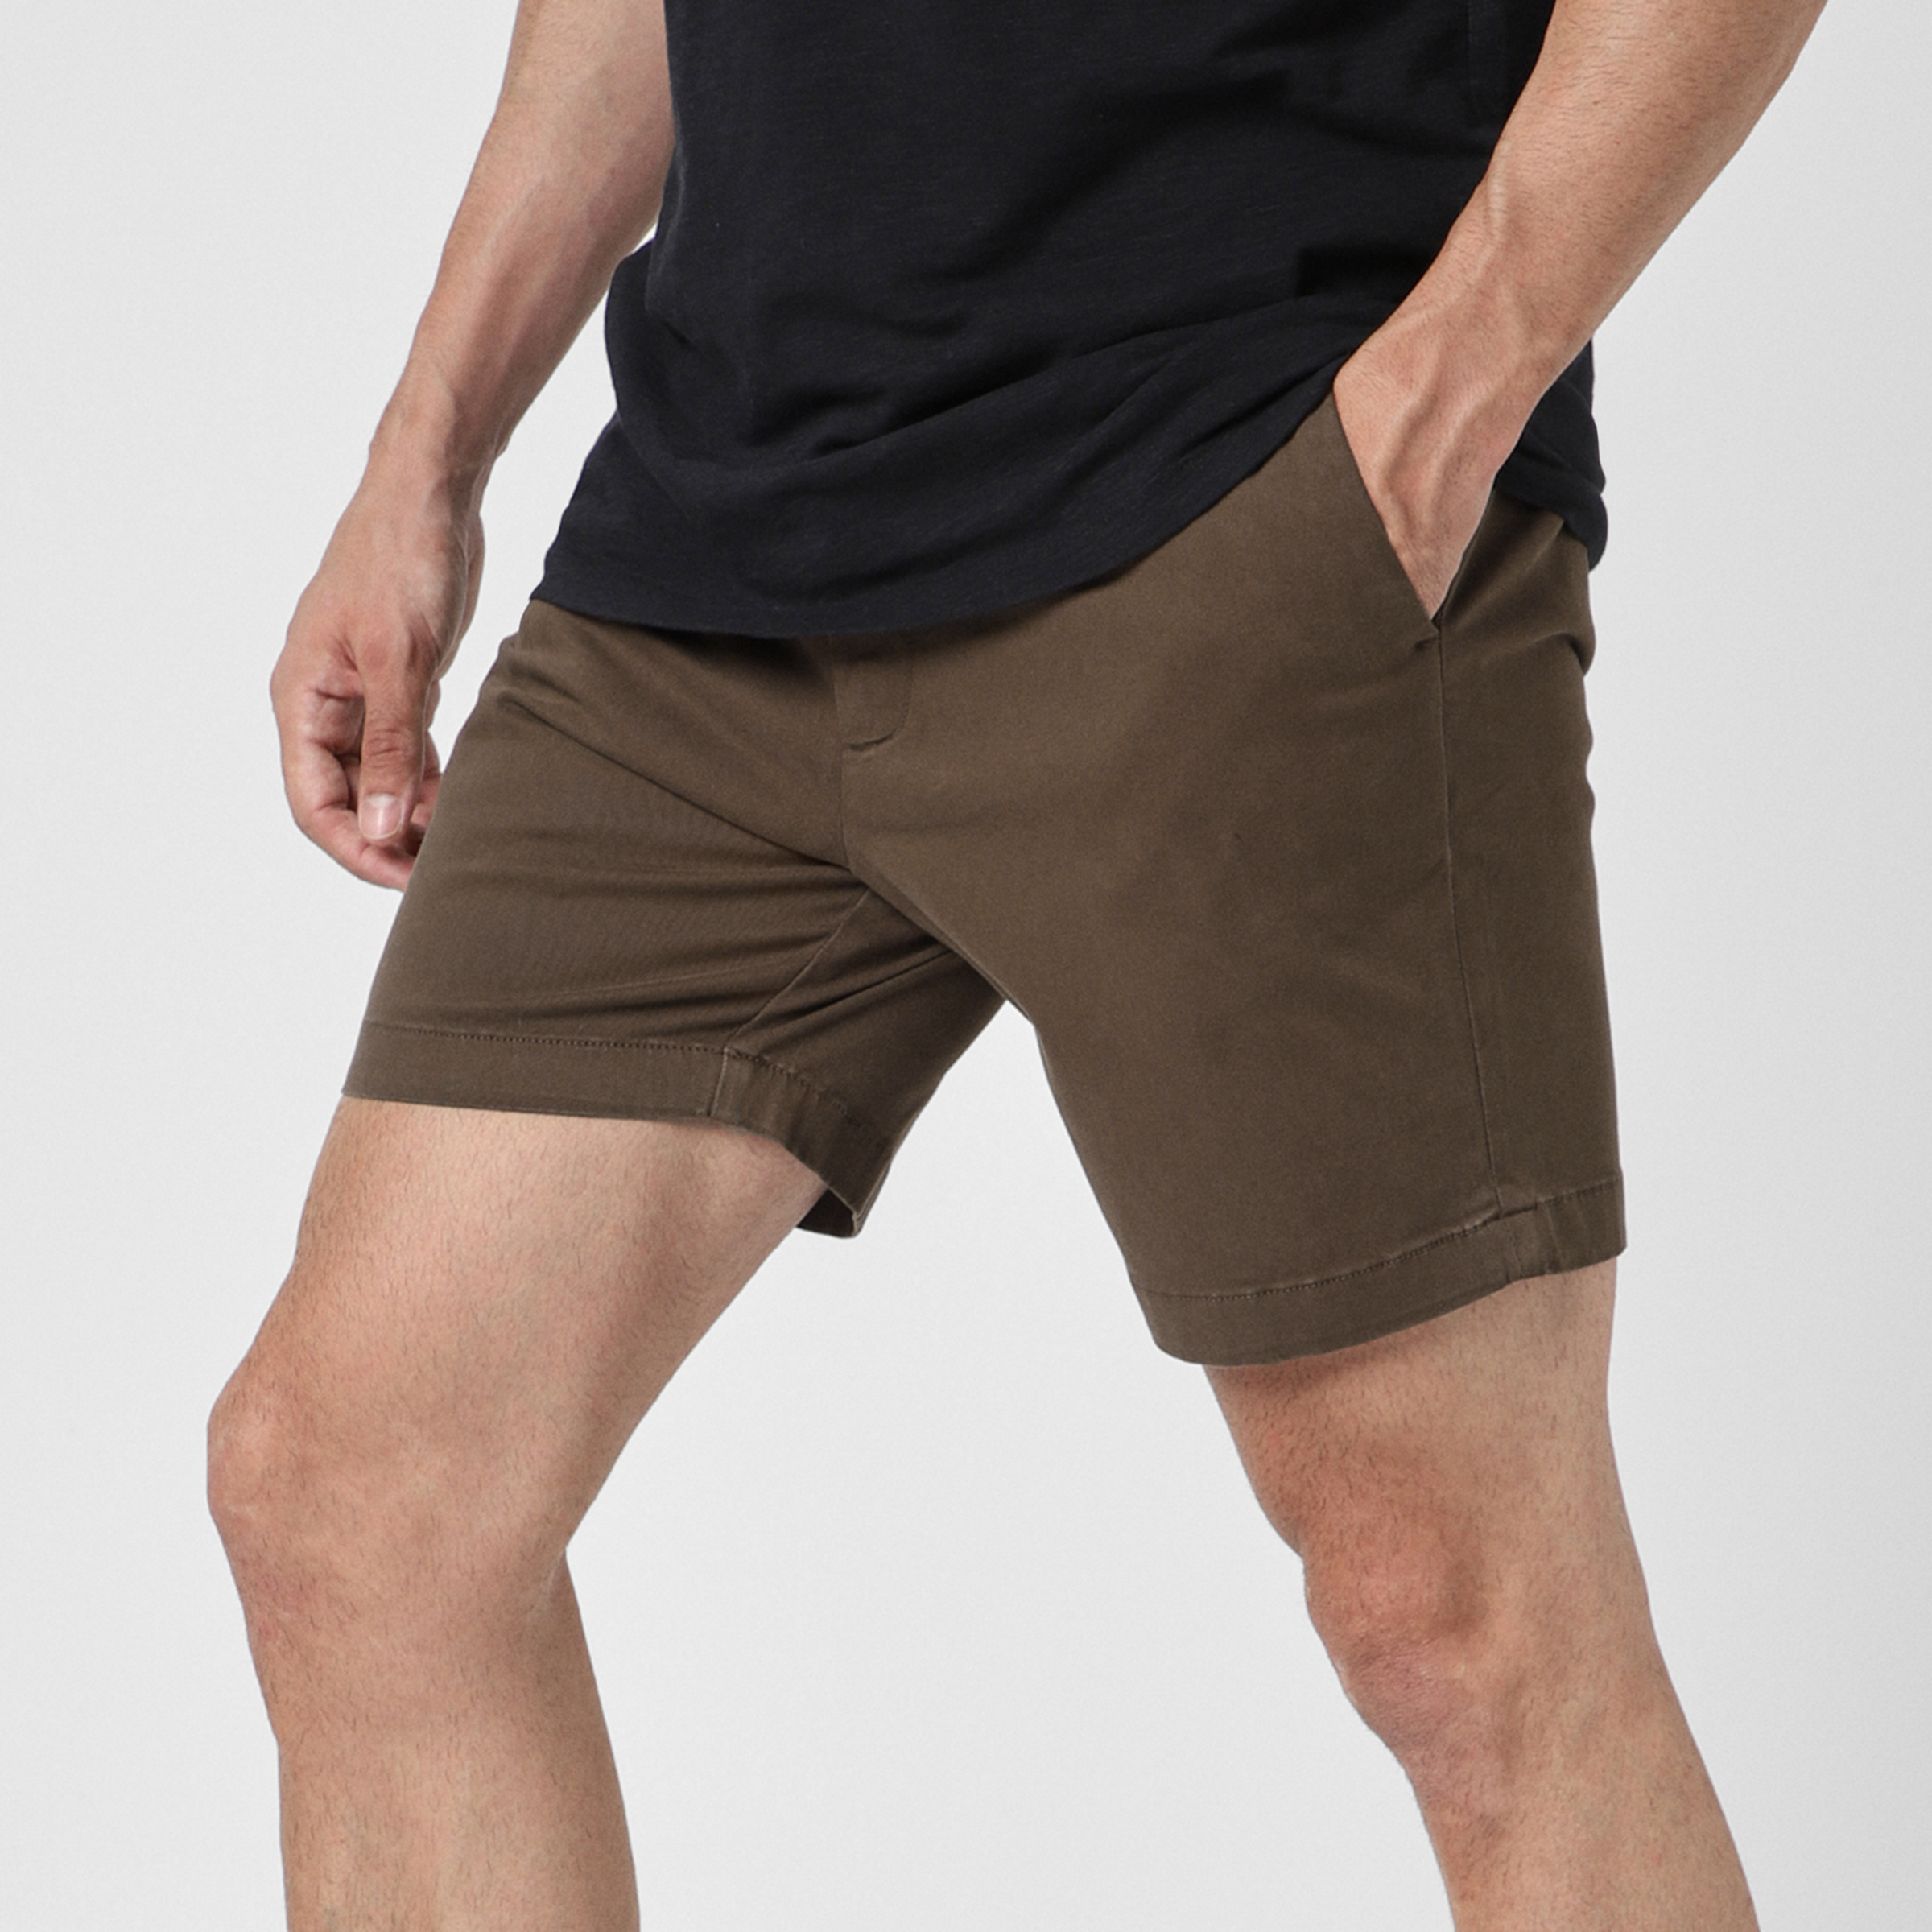 Stretch Chino Short 7" in Cocoa left side on model